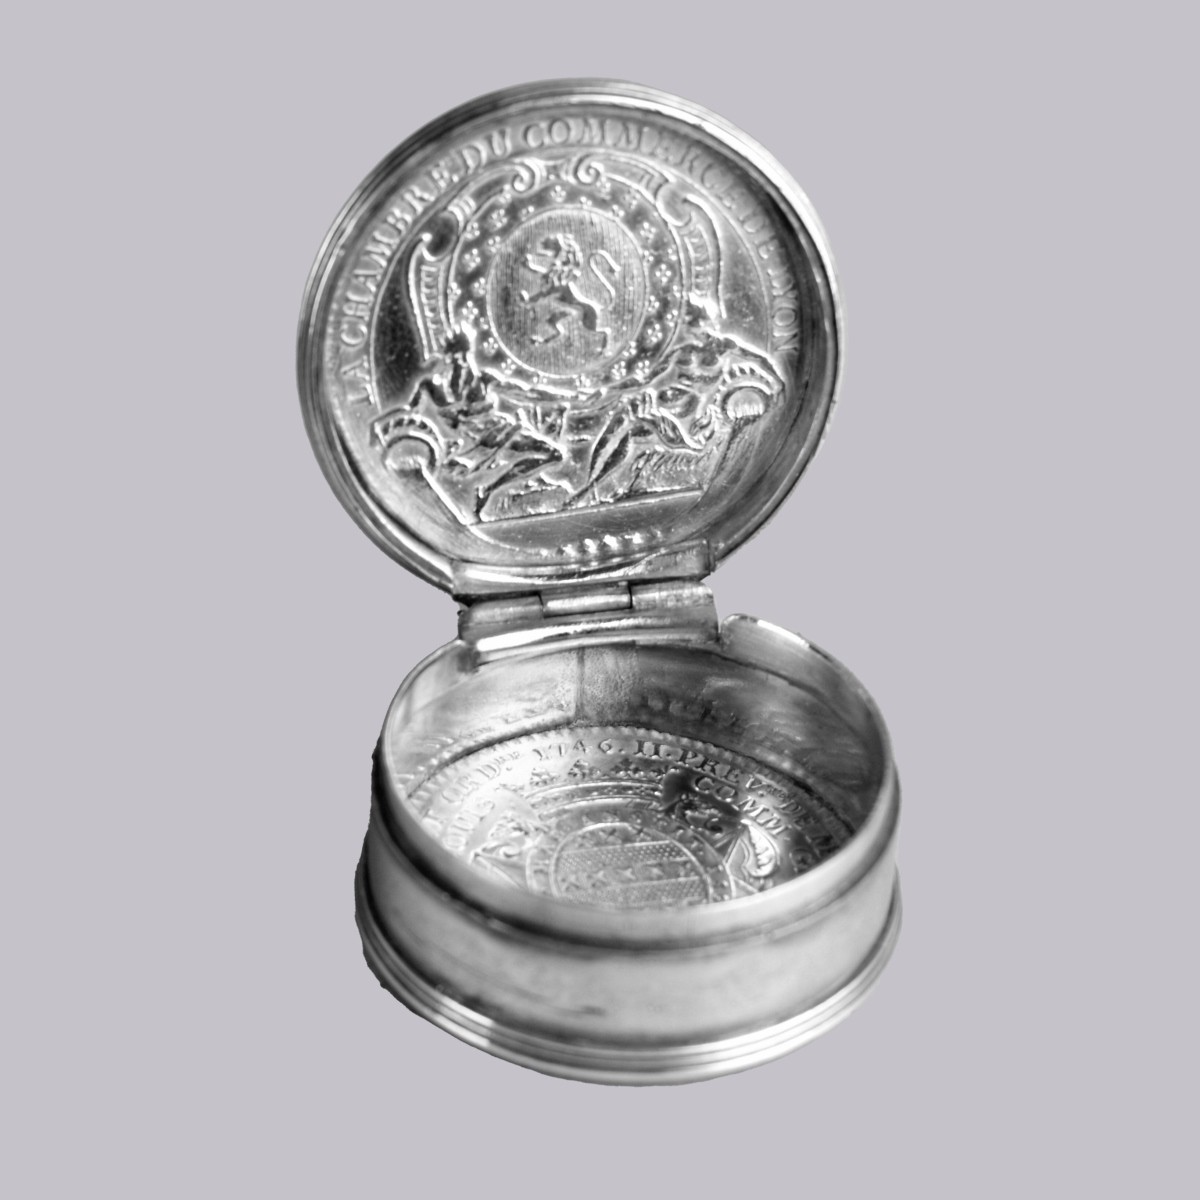 Antique French Miniature Silver Box